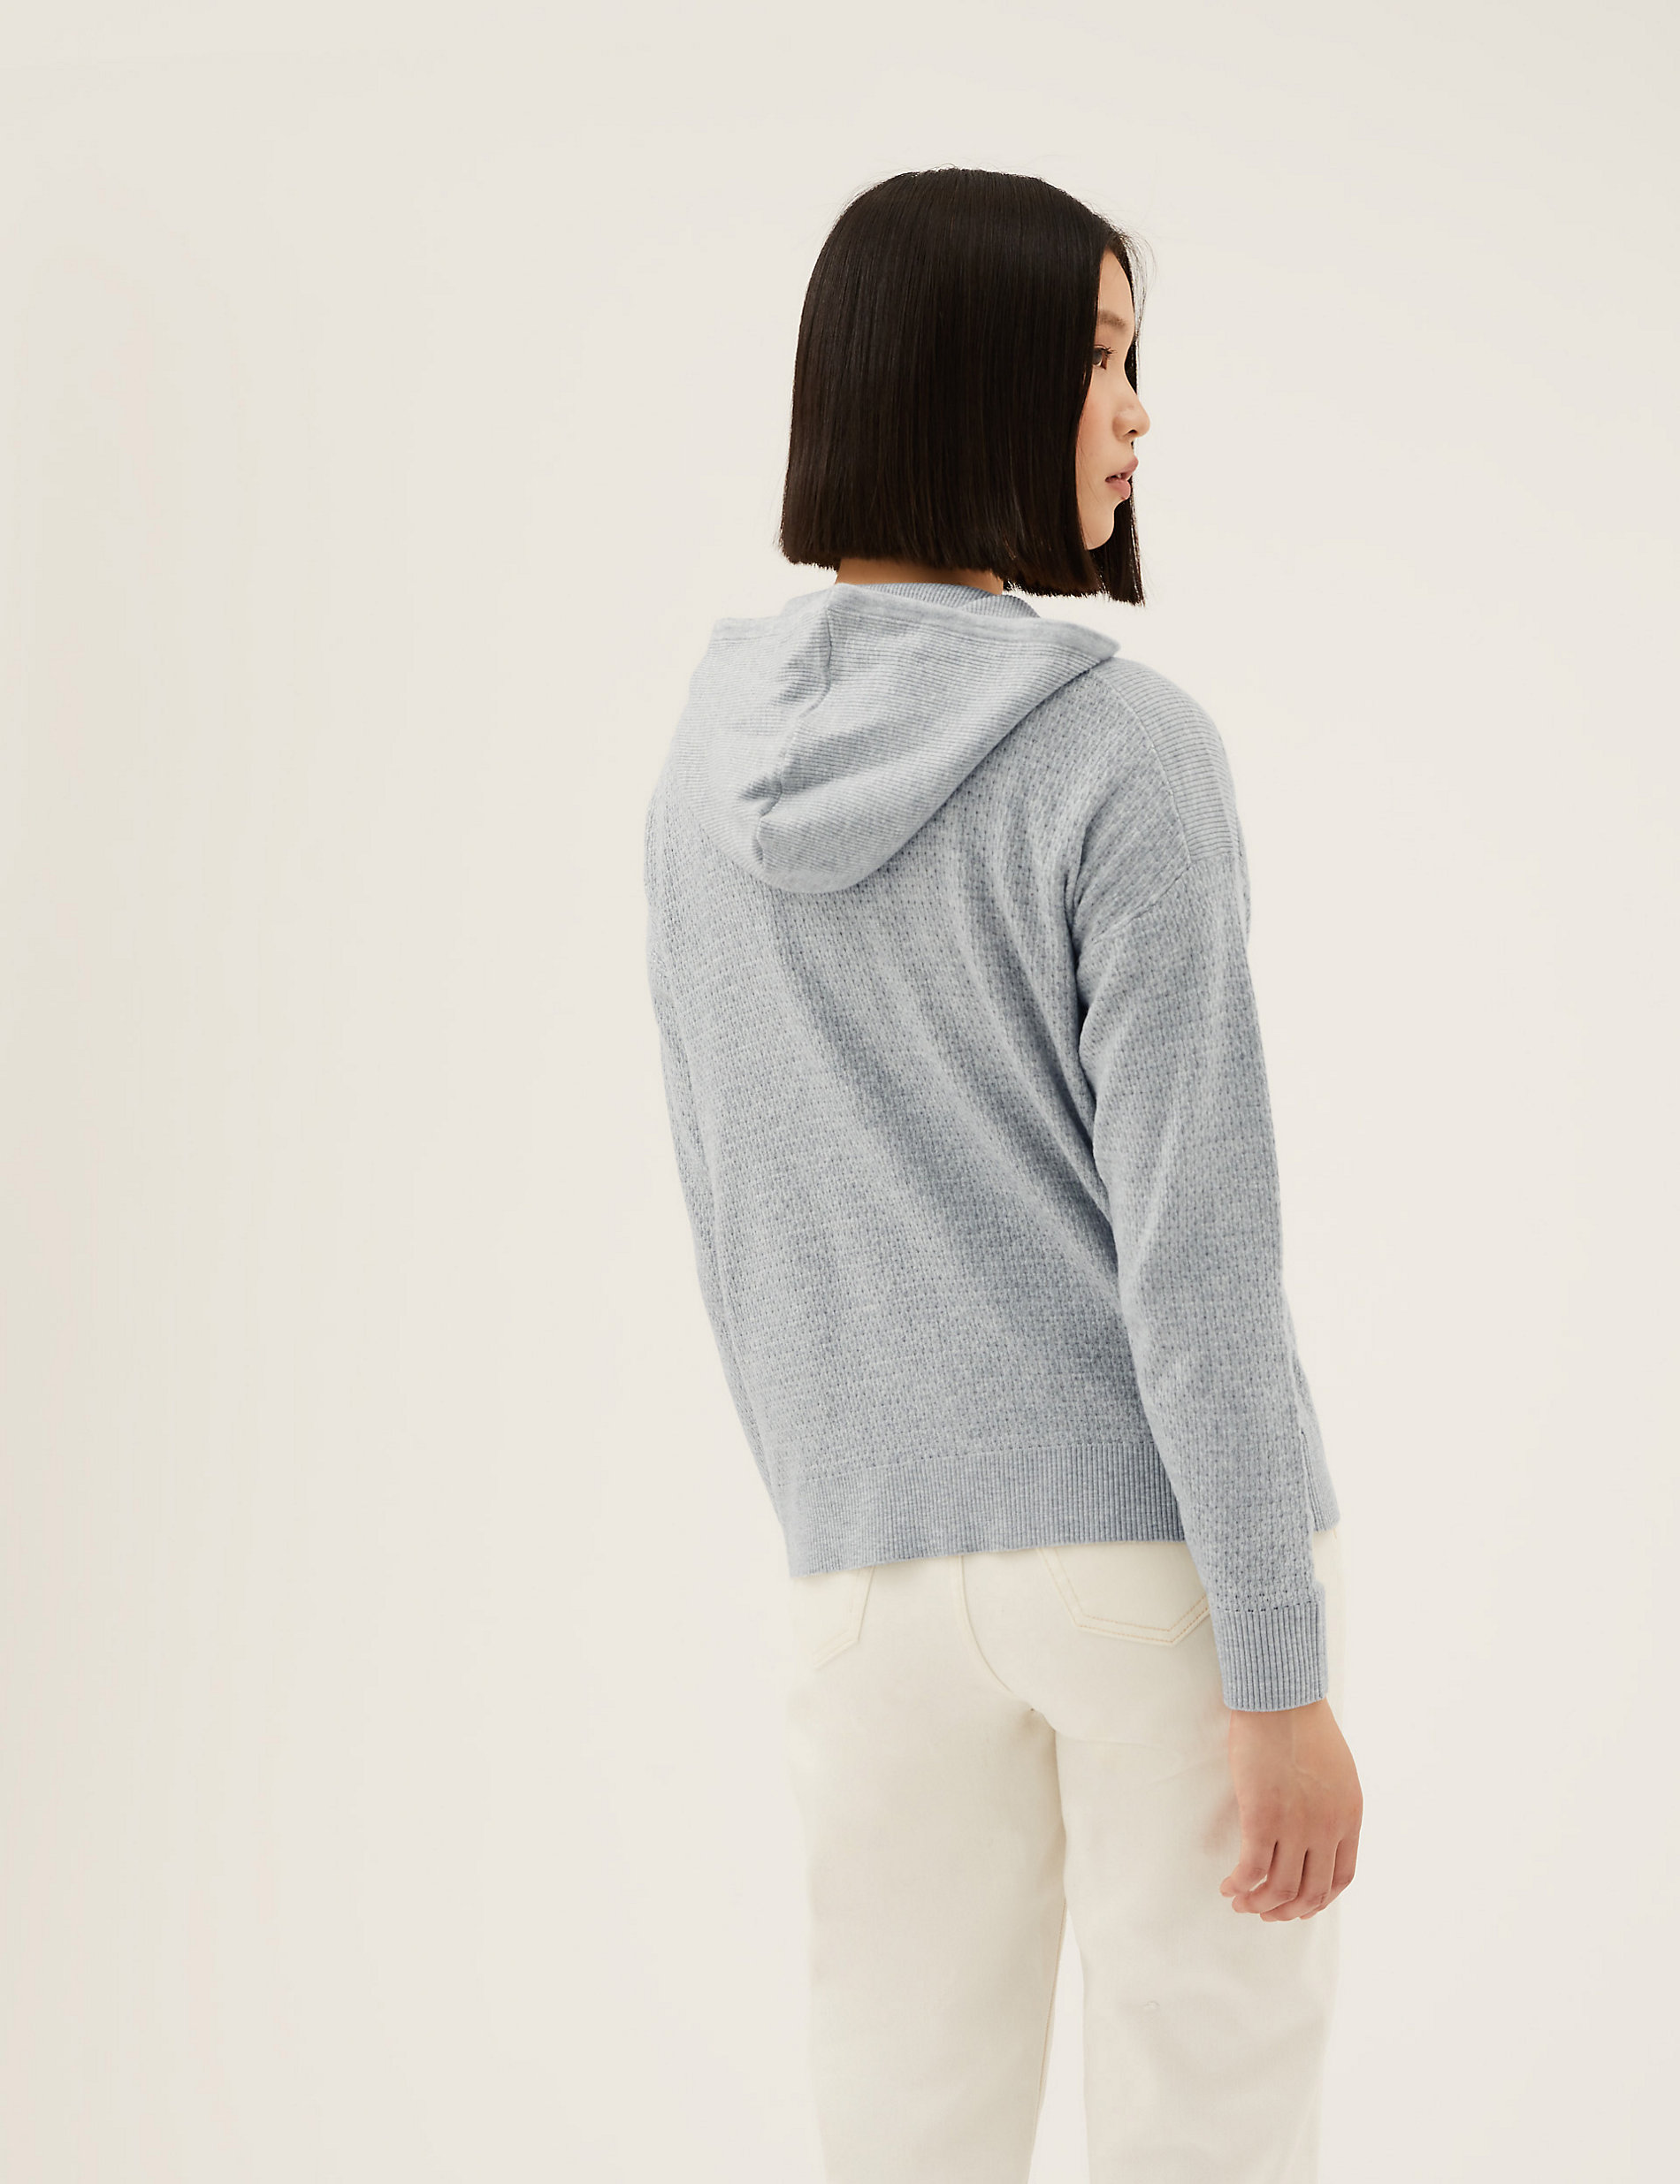 Soft Touch Textured Relaxed Zip Up Hoodie